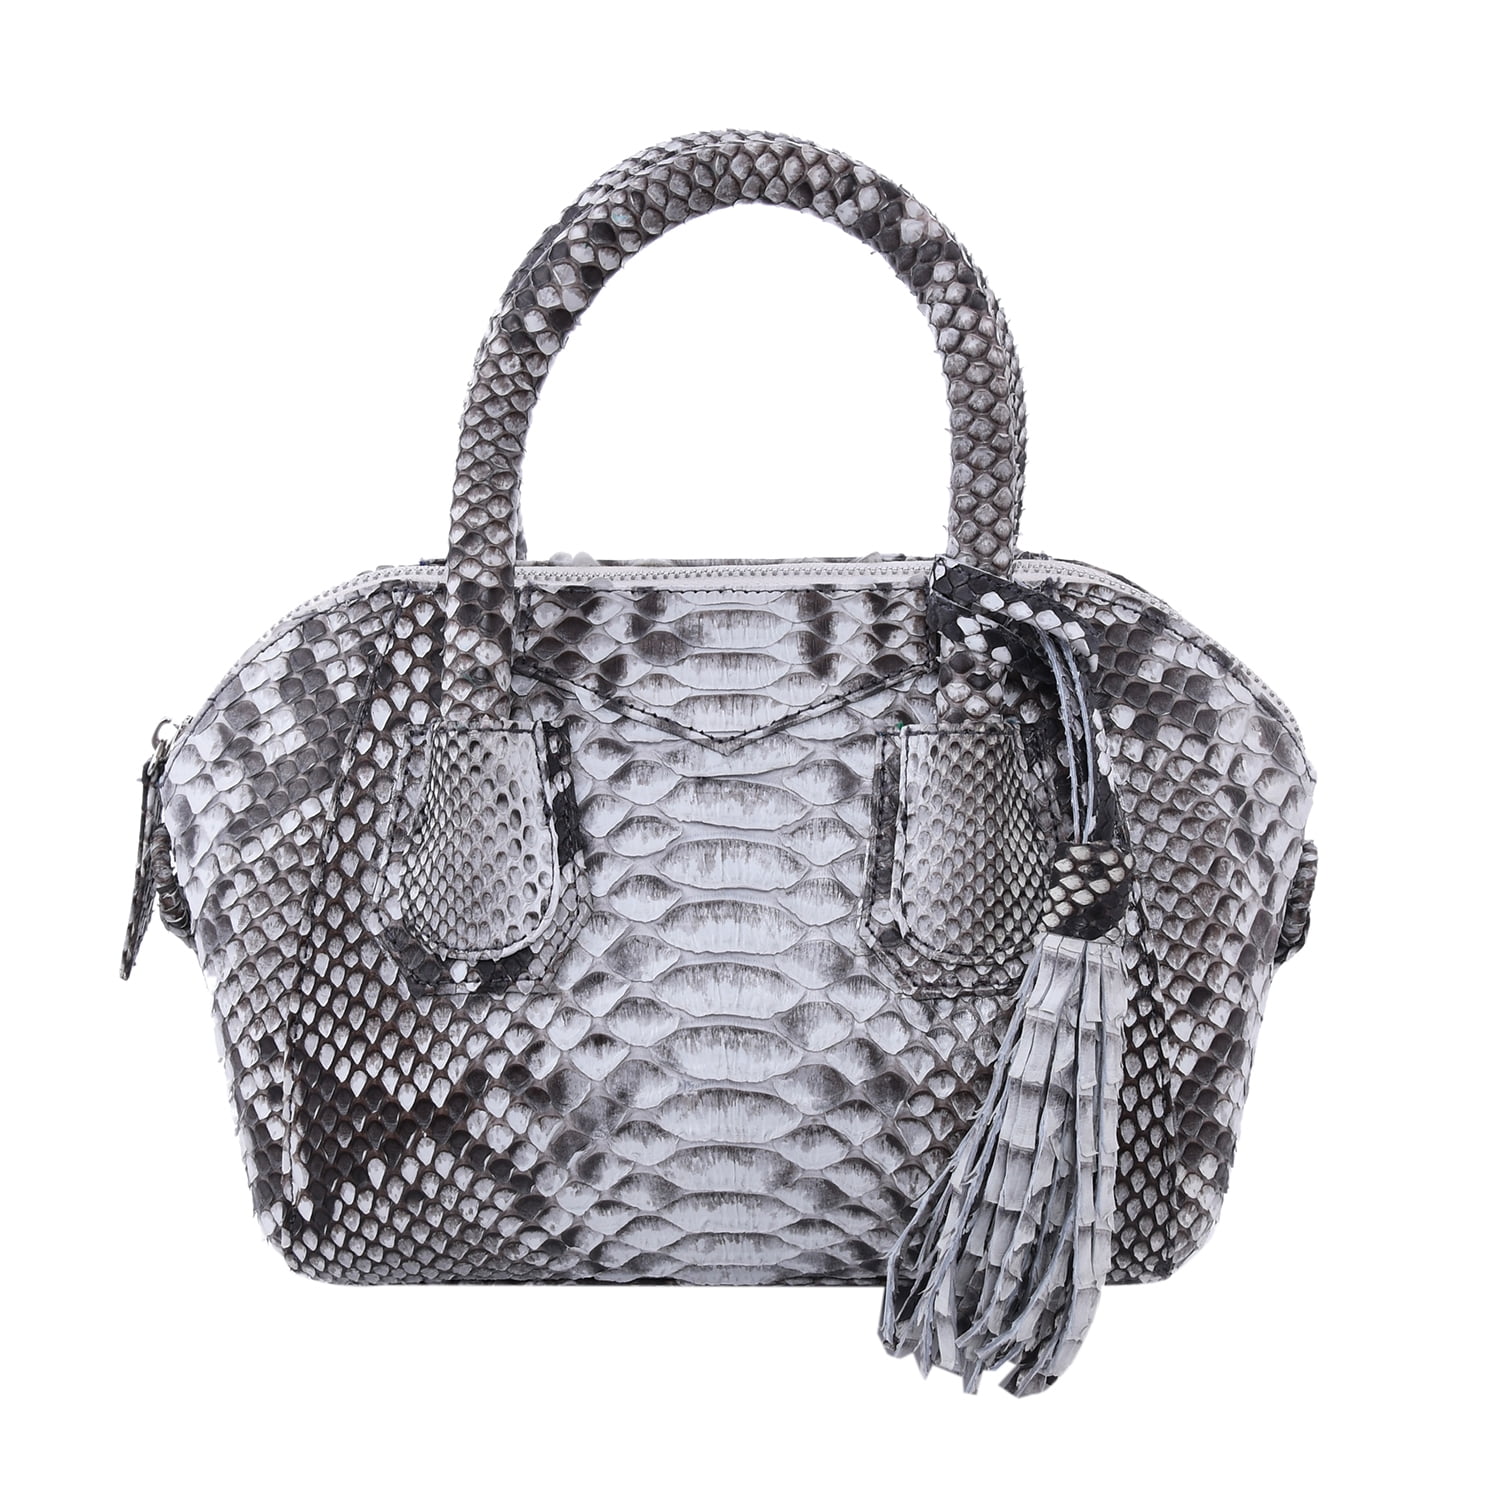 Details about   Stunning Metallic Gray Bejeweled Convertible Clutch Purse with Rhinestones 